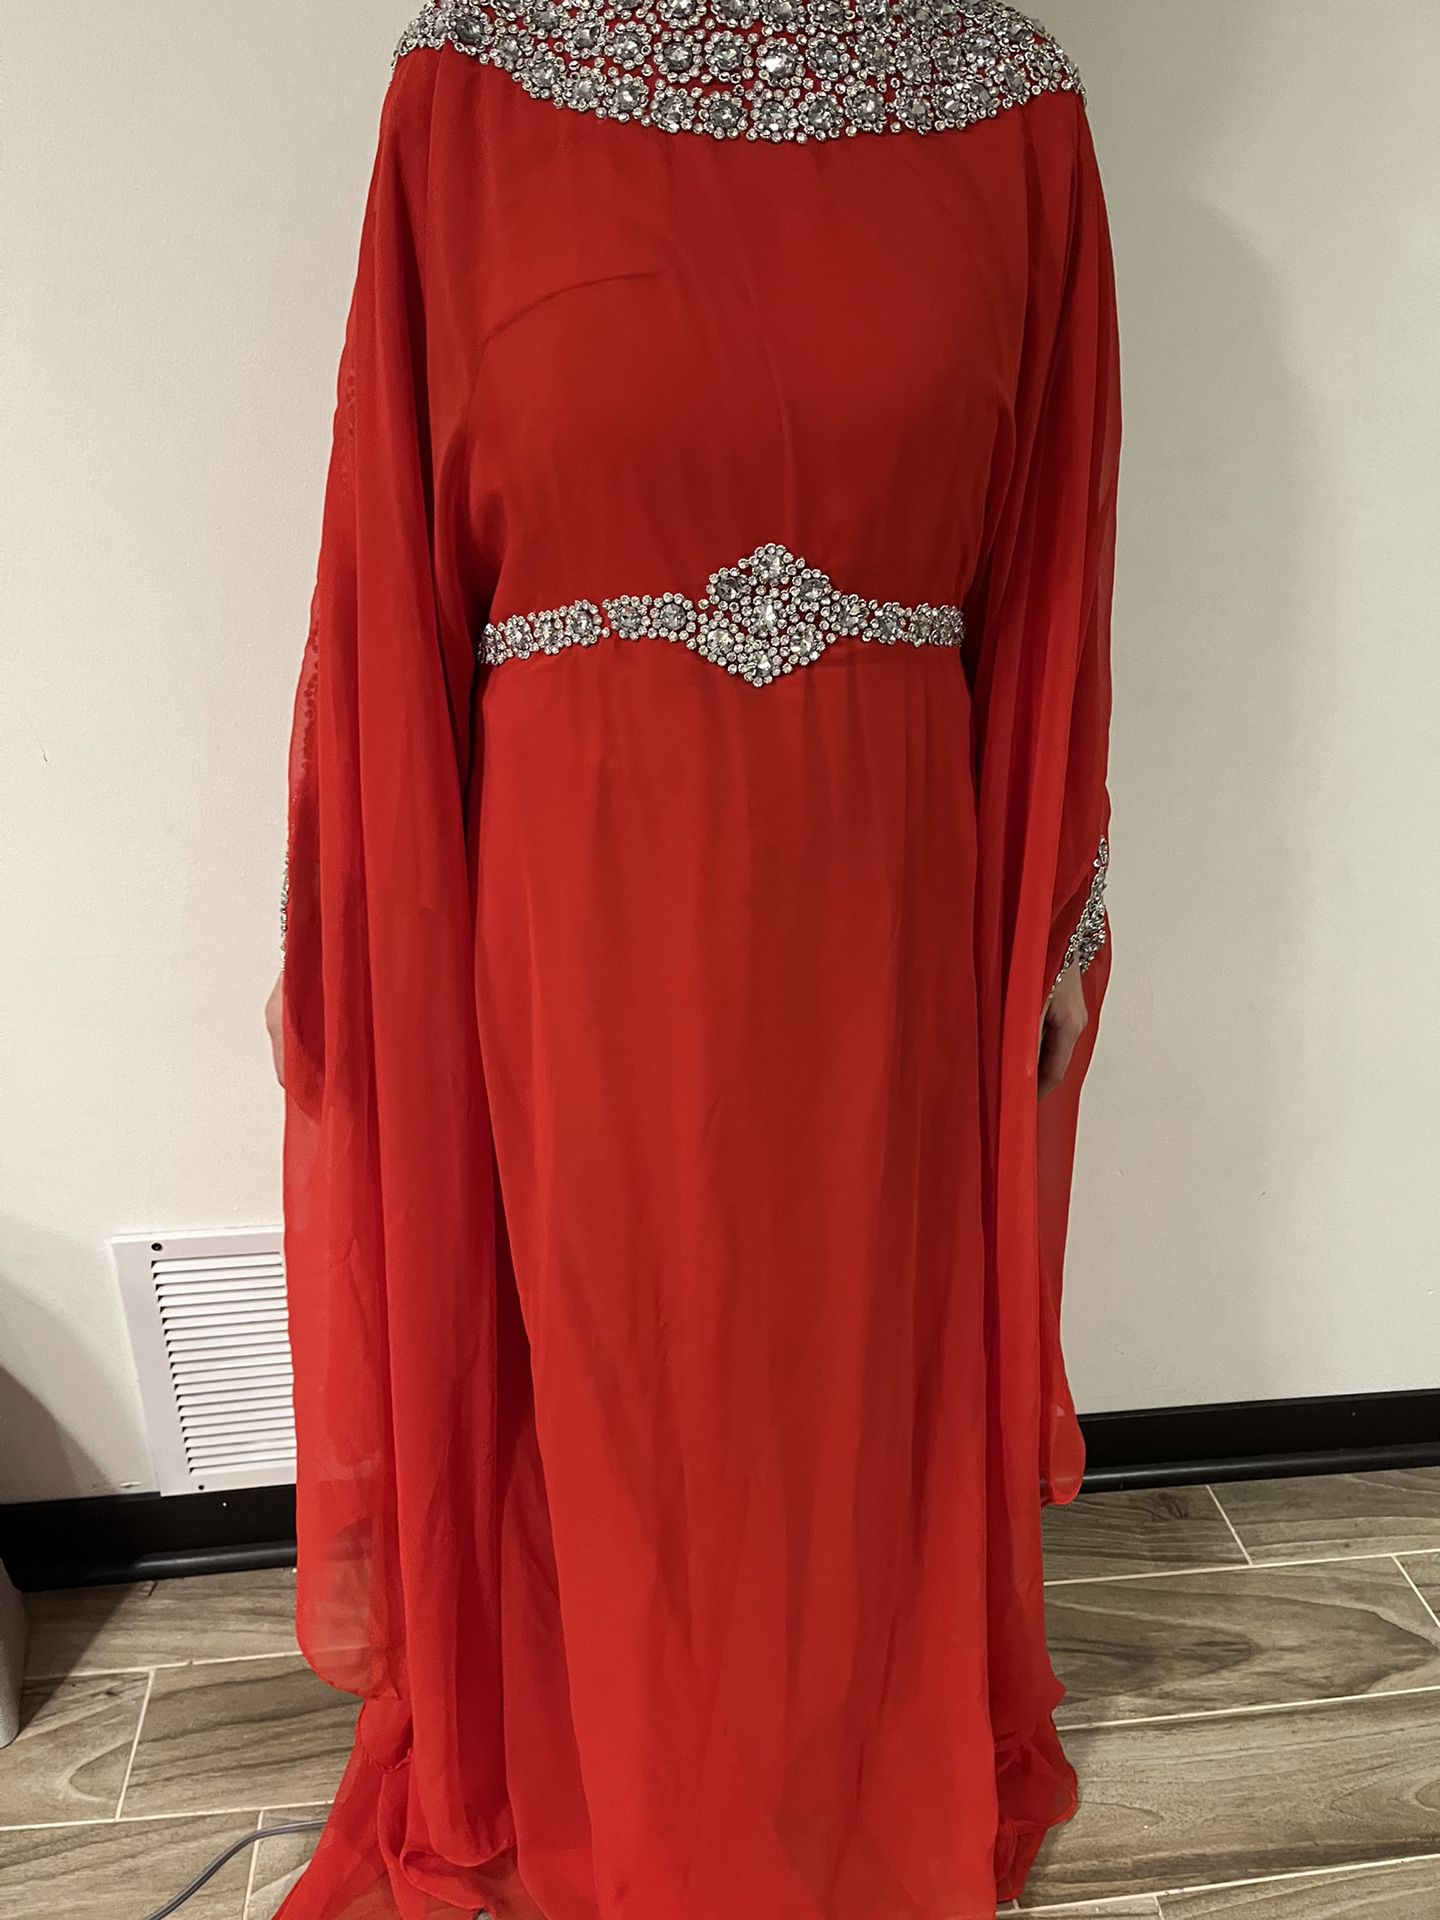 Red Sequin Kaftan One Size It Ties In The Middle To Make Smaller Or Leave Loose For Bigger Sizes